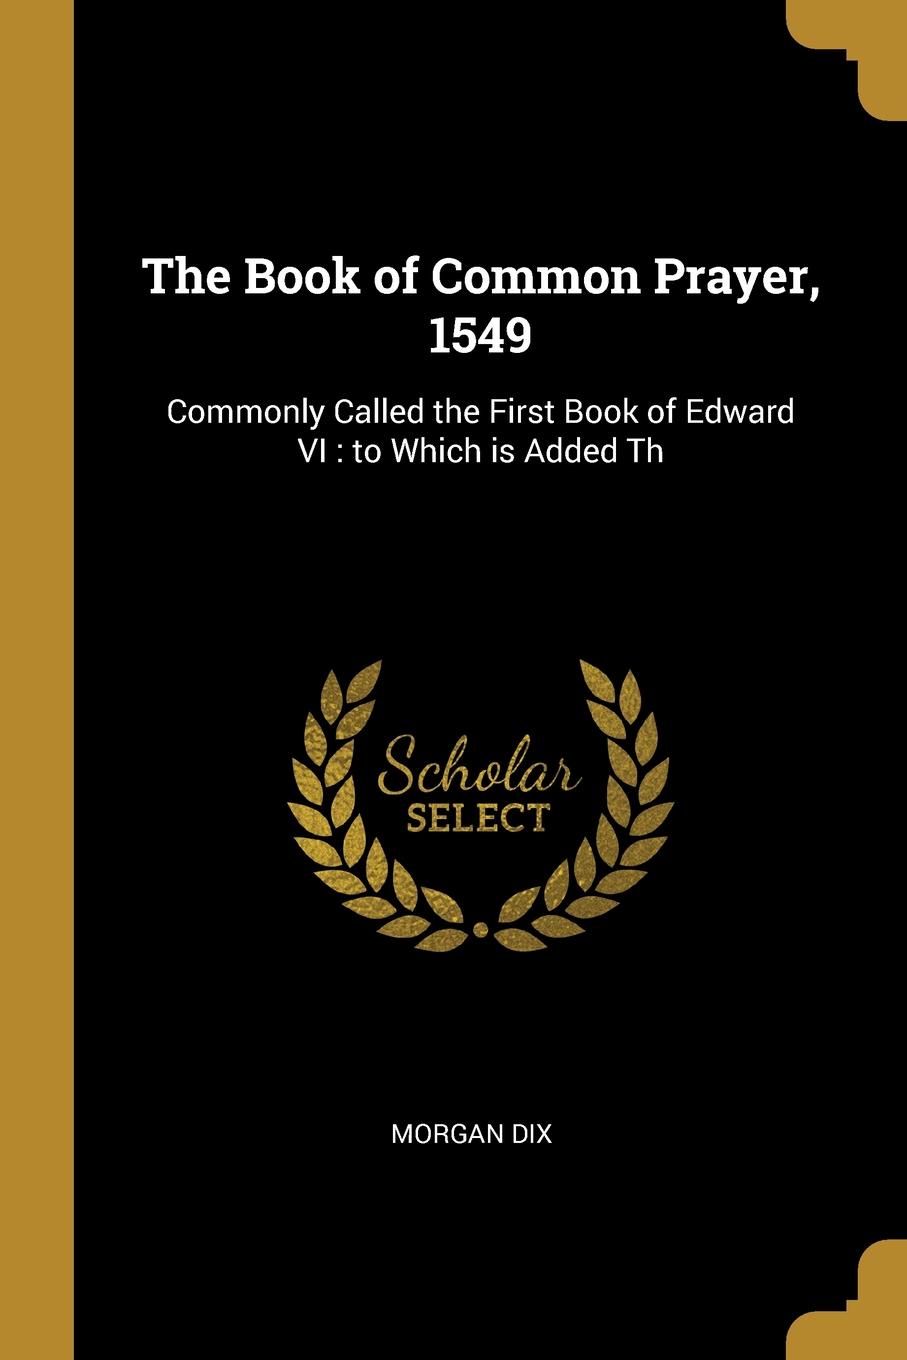 The Book of Common Prayer, 1549. Commonly Called the First Book of Edward VI : to Which is Added Th